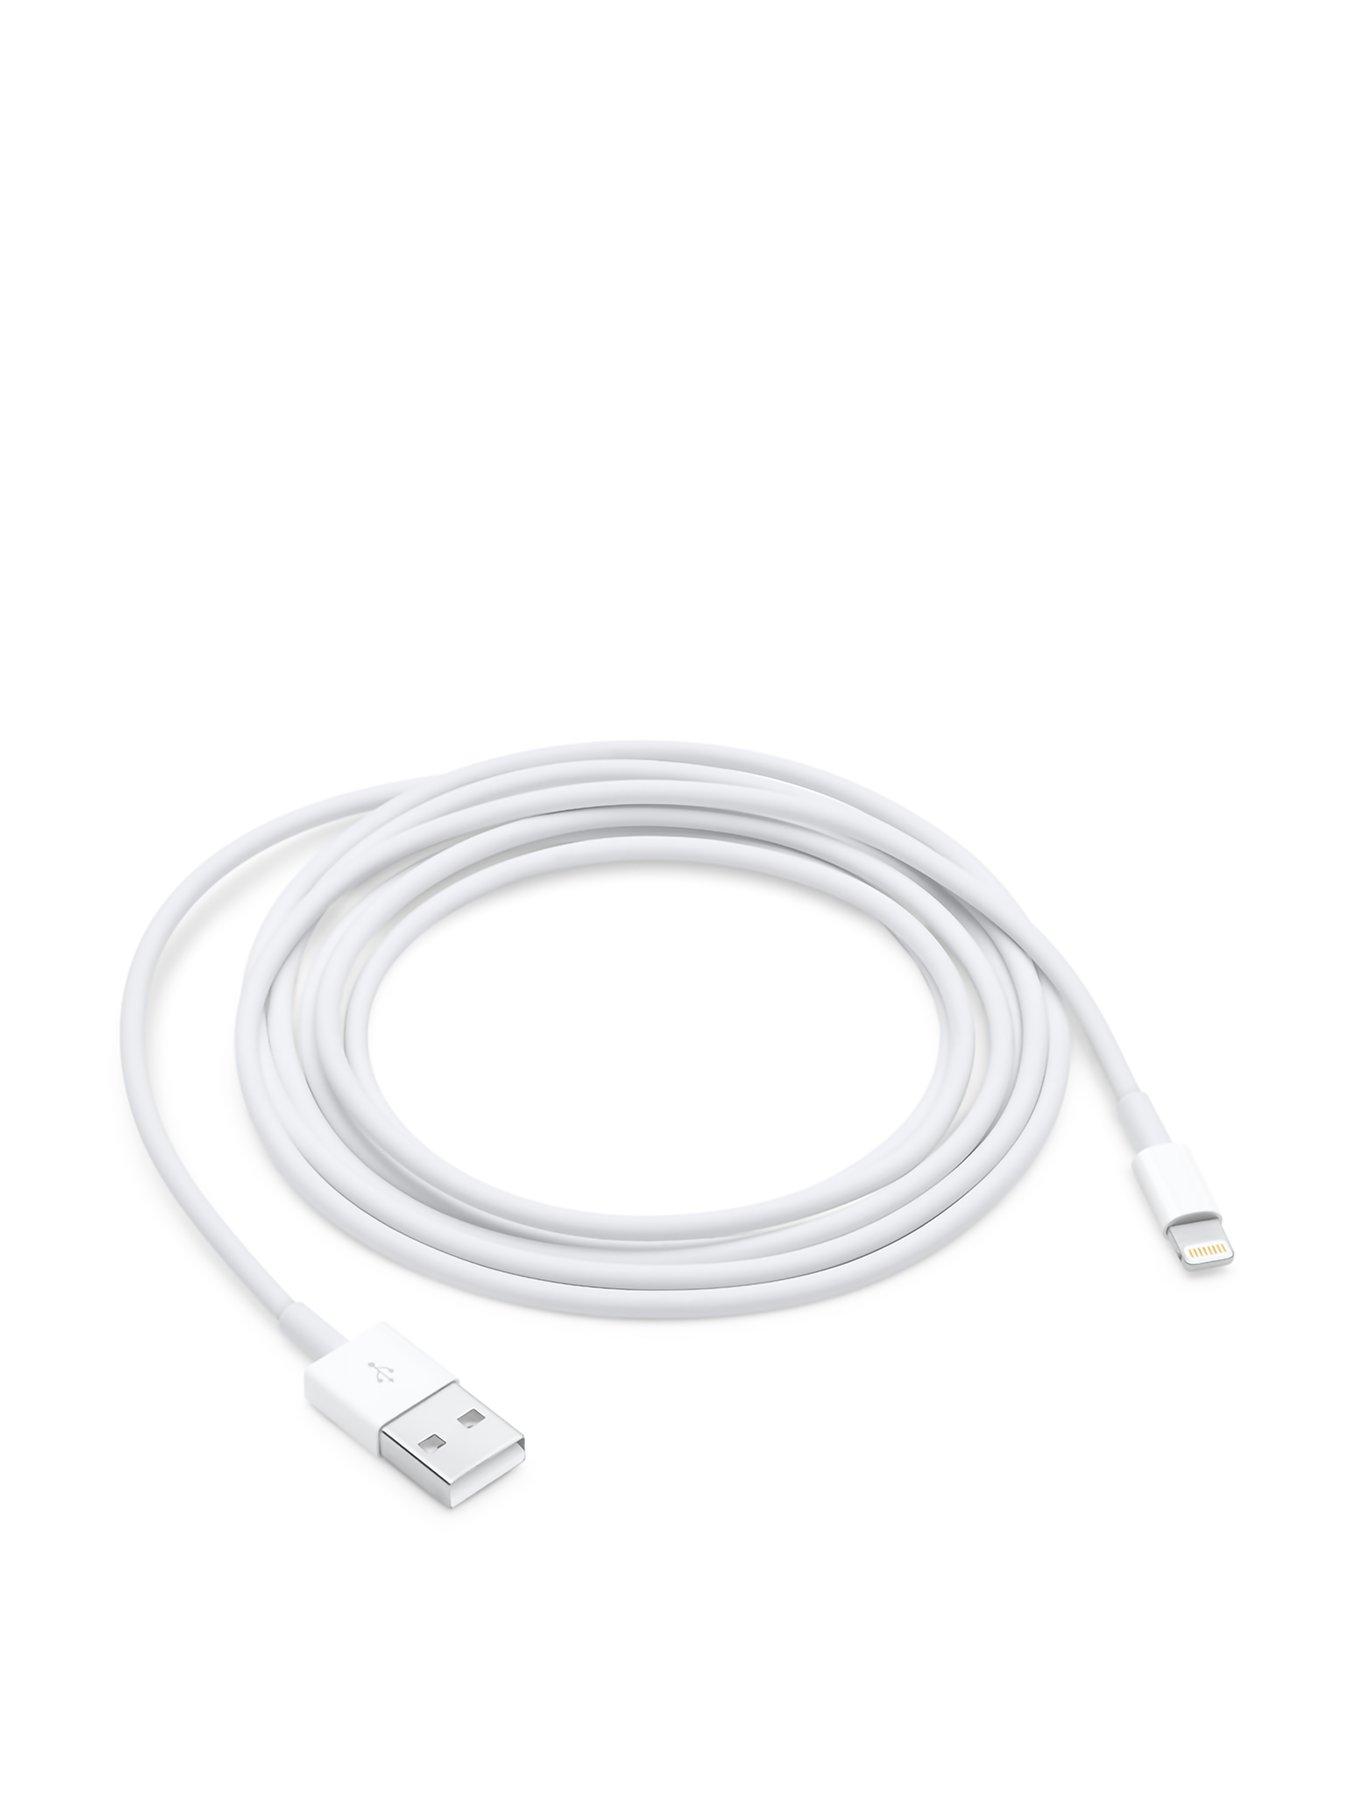 Apple Lightning to USB Cable - 2m 